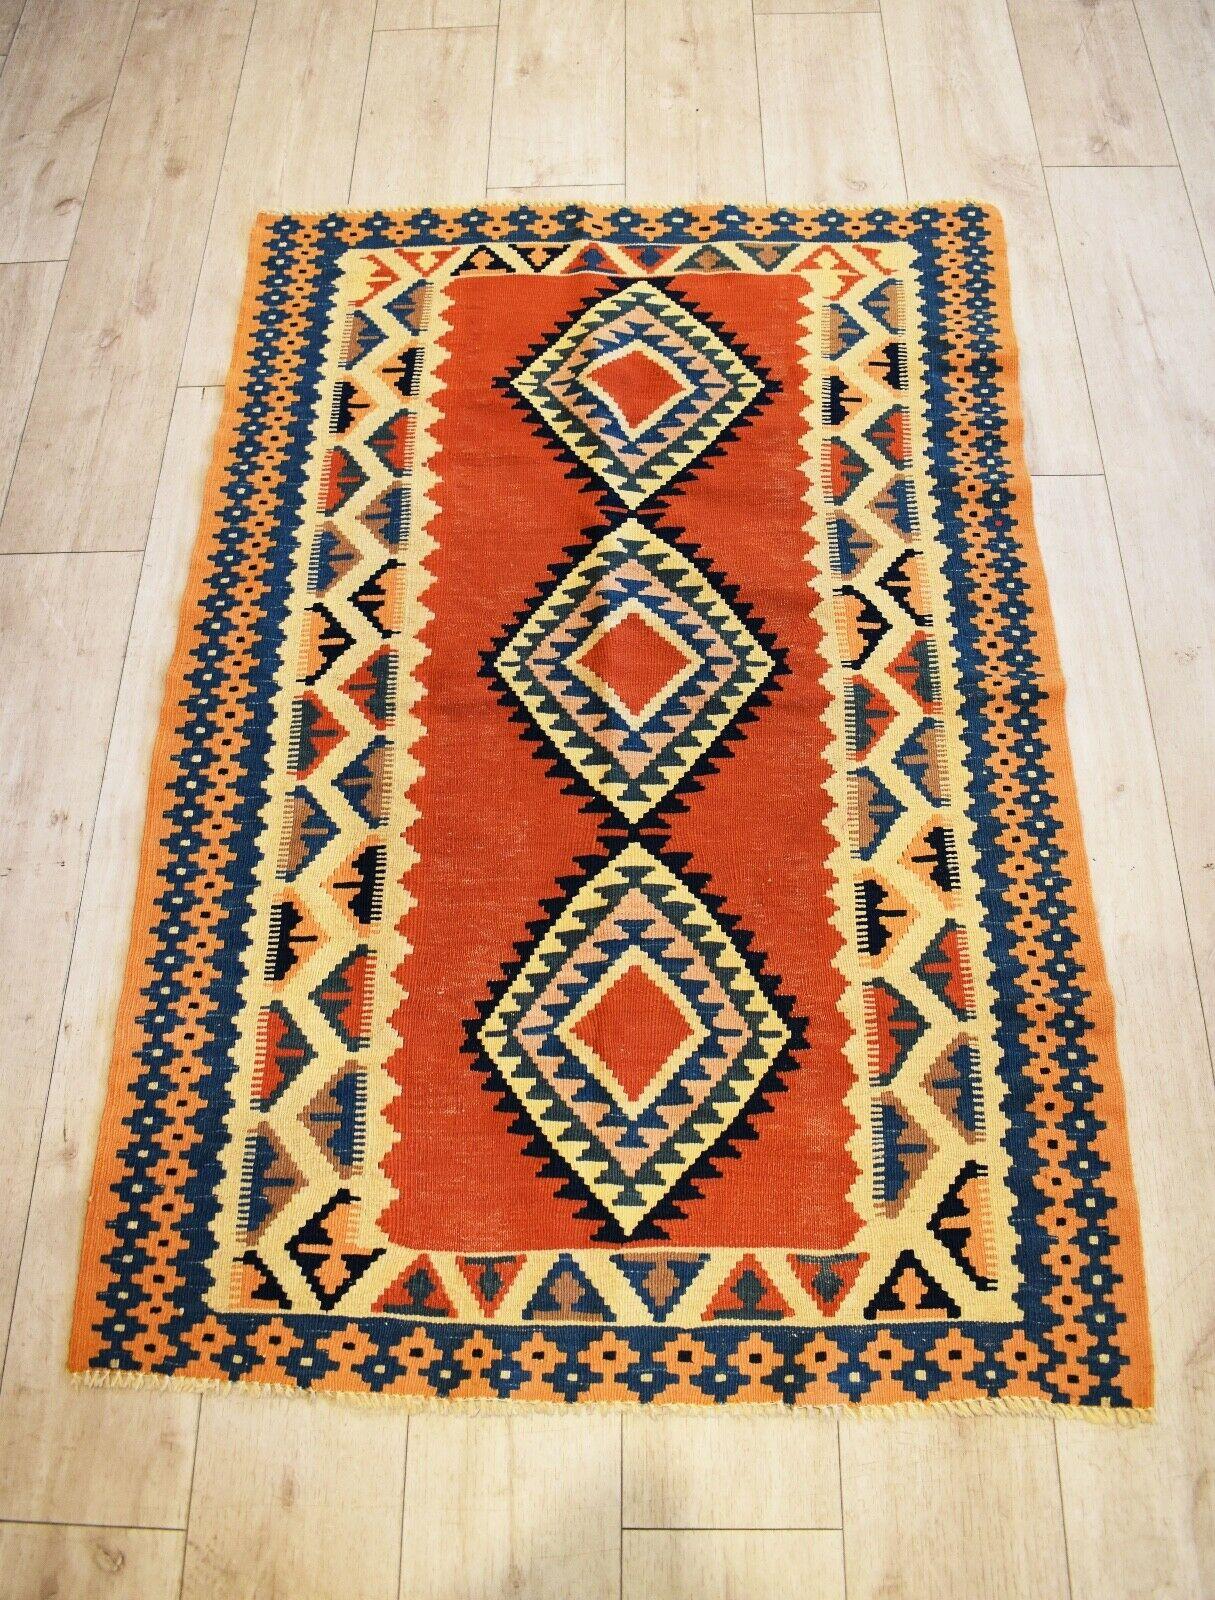 Very rare and unusual beautiful handwoven vintage Kilim runner
with patterns in shades of natural dyed orange, blues, black, and yellow colours
Handwoven with natural dyes.
Has a lovely aged patina & nice quality.